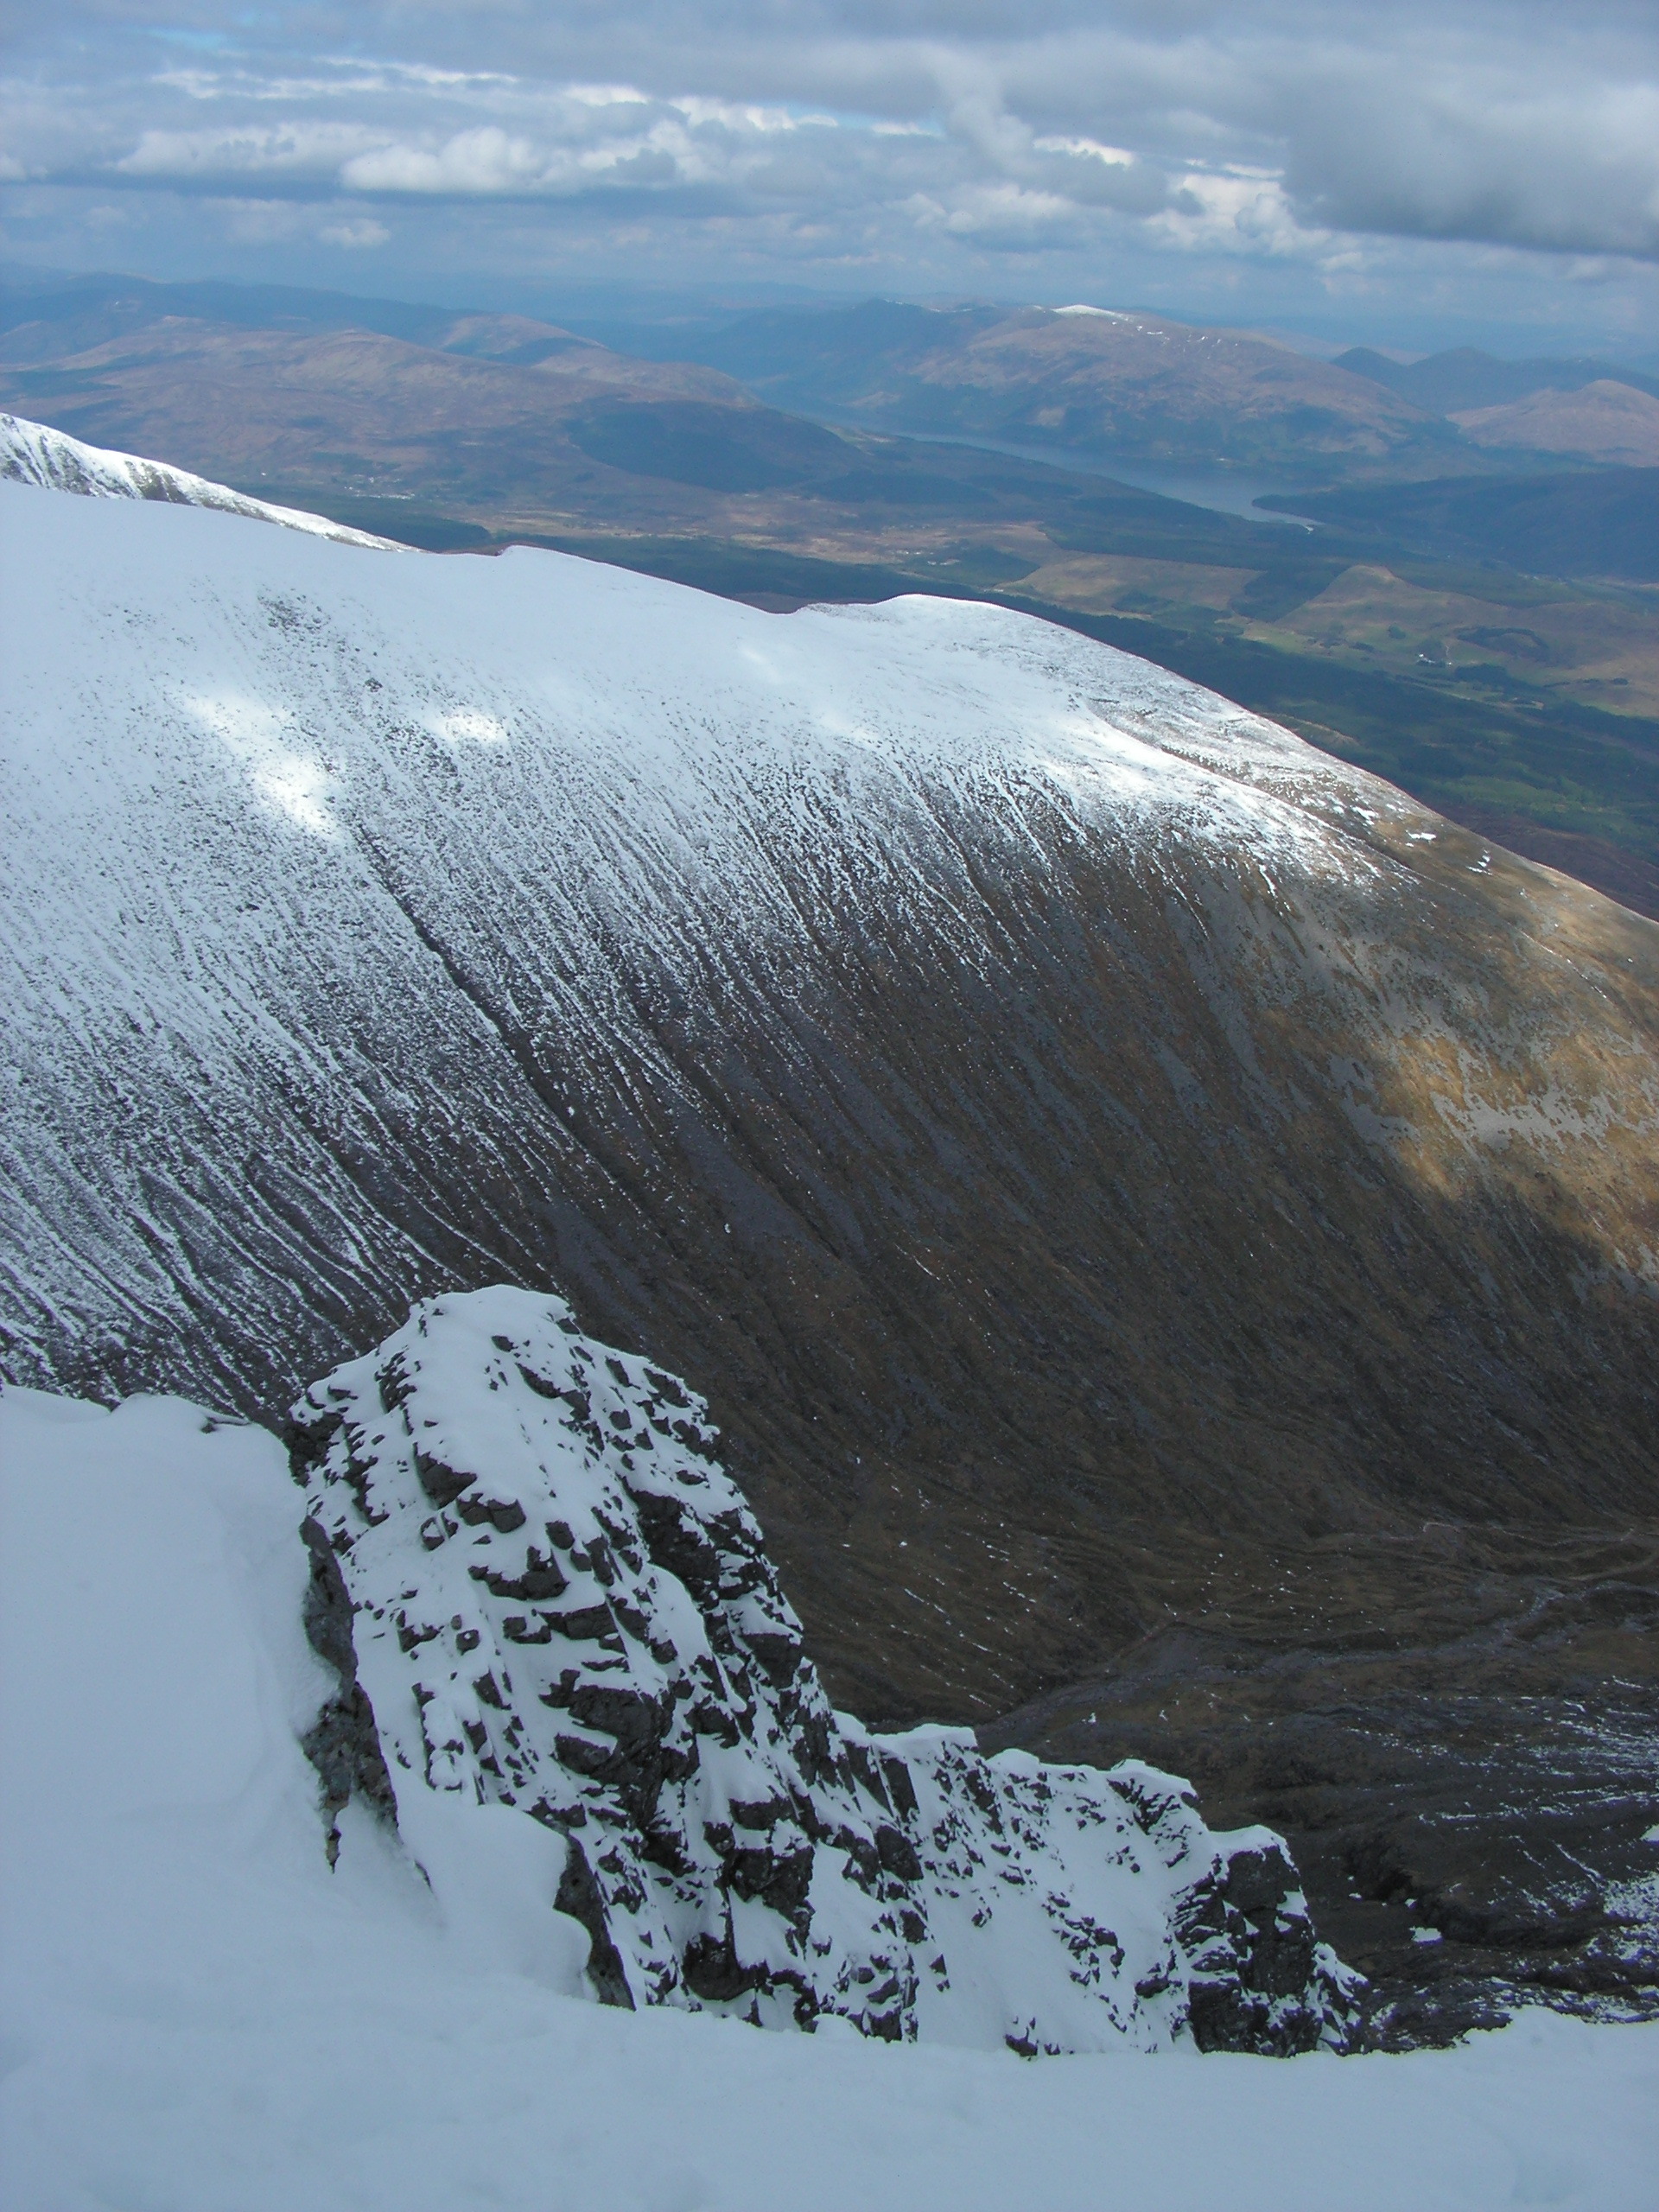 from the top of Ben Nevis, Scotland, Apr. 22, 2012